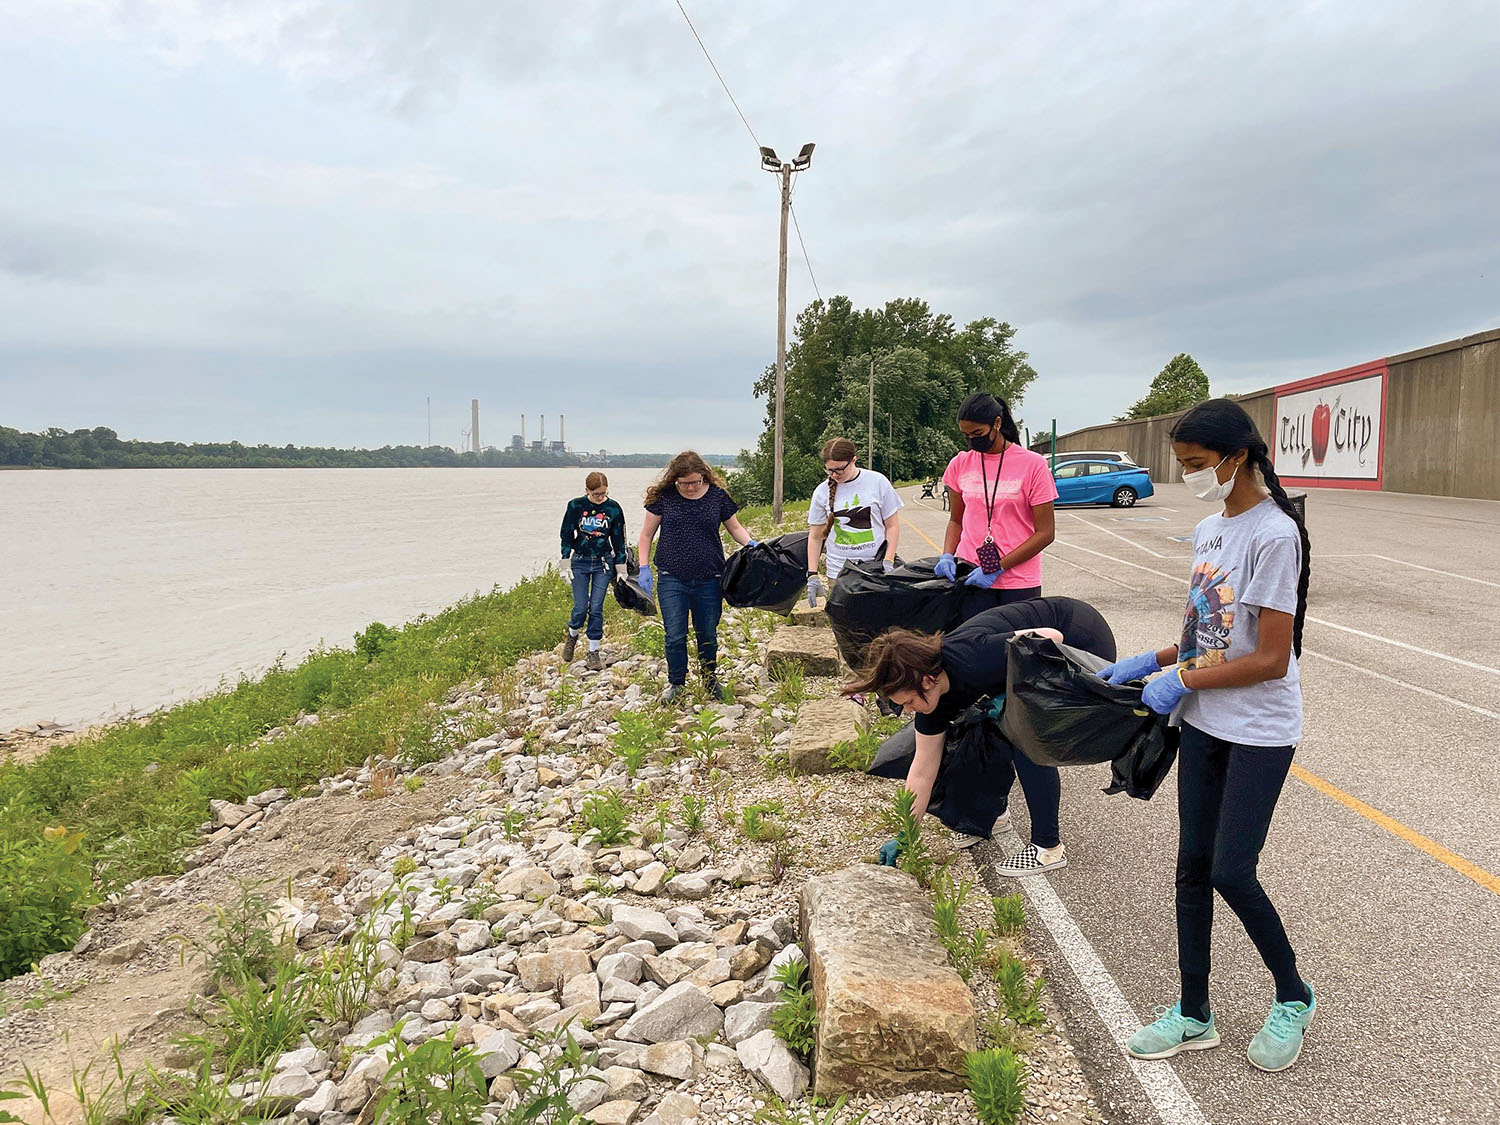 Perry County, Ind., volunteers, led by coordinator Ceceilia Mundy, pick up trash along the shore of the Ohio River in a “mini-sweep” event earlier this year. (Photo courtesy Ohio River Valley Sanitation Commission)